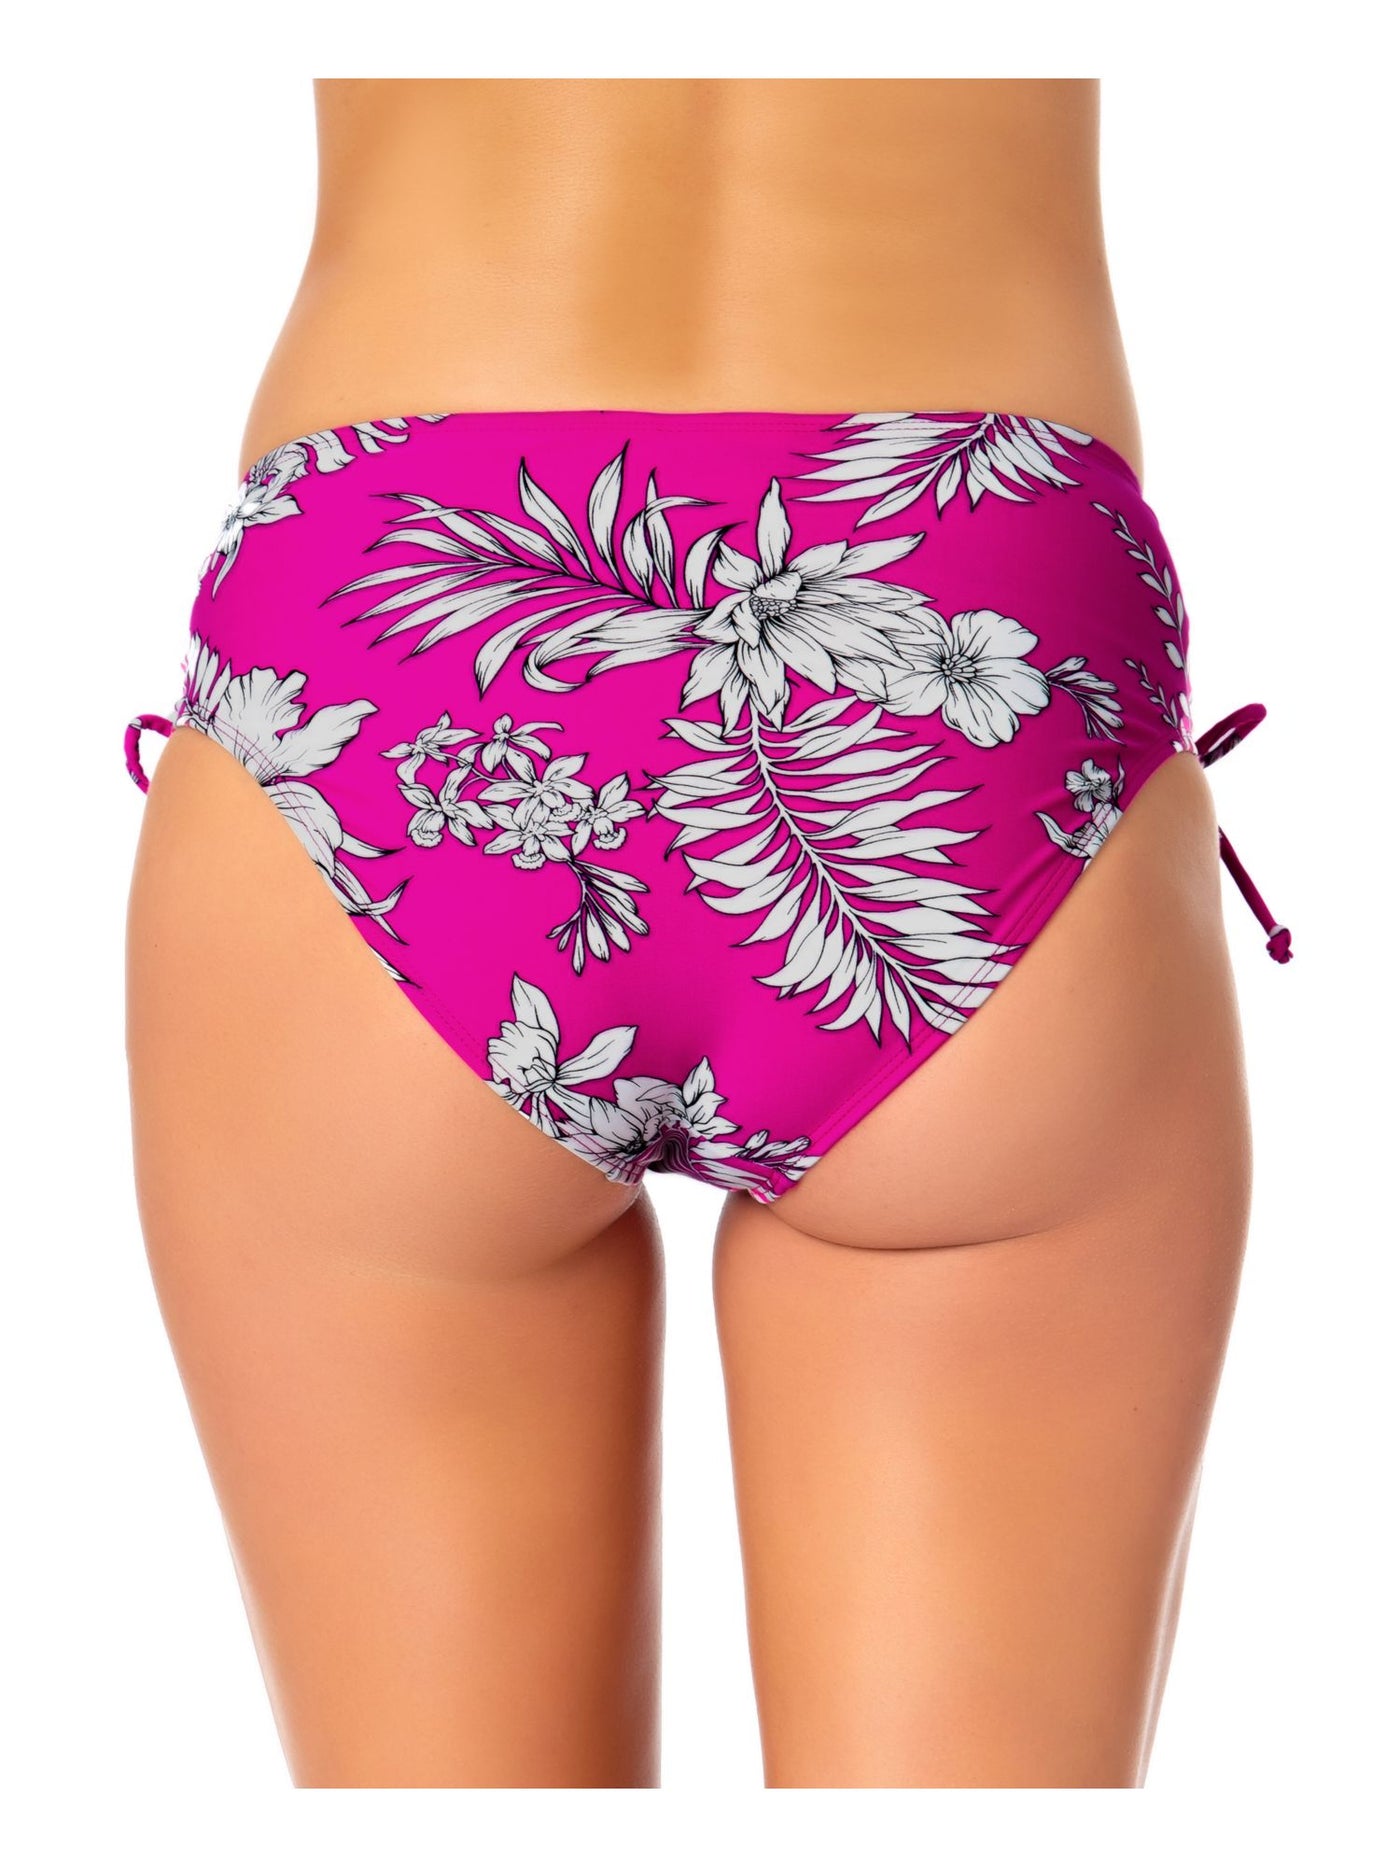 CALIFORNIA WAVES Women's Multi Color Floral Stretch Tie Details Lined Moderate Coverage Side Tie Swimsuit Bottom XS